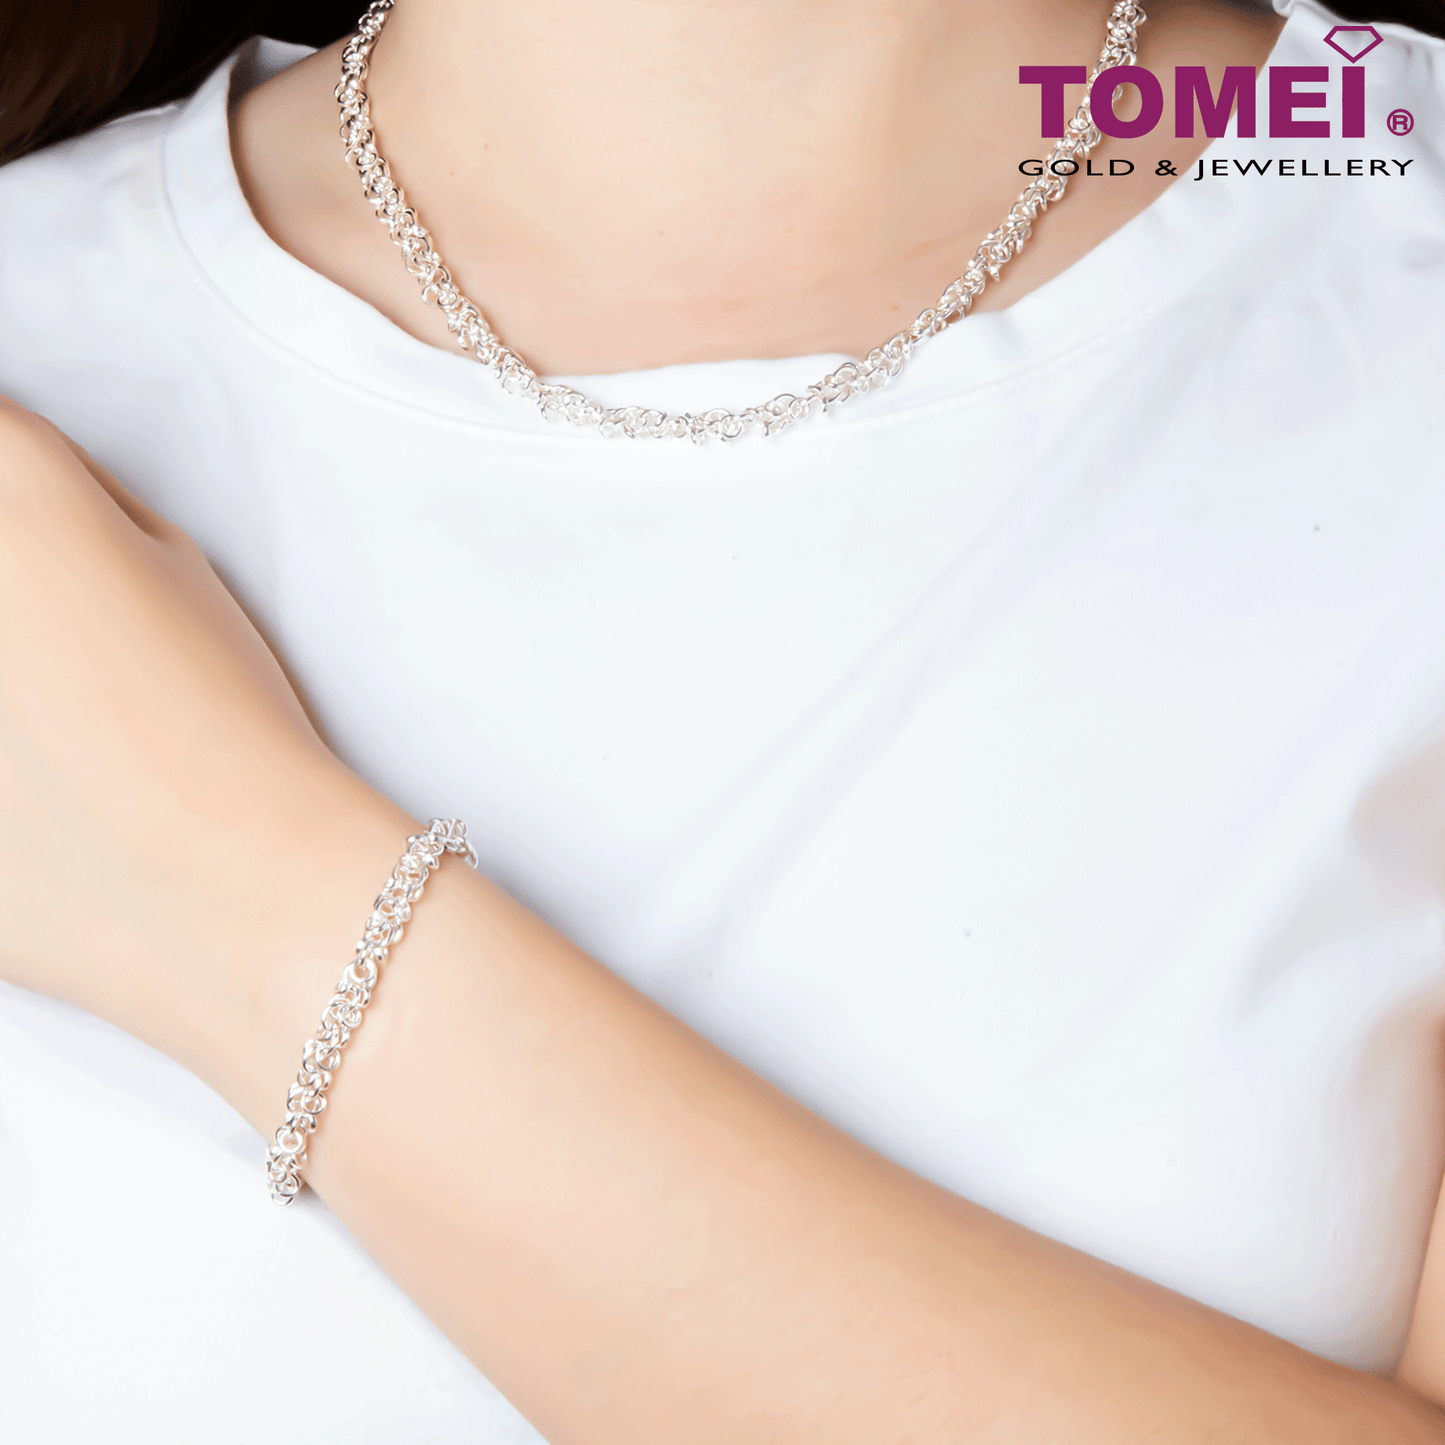 TOMEI [Online Exclusive] Frosty Faith Tri-Ring Bracelet | Tomei Sterling Silver 925 (SB87880)